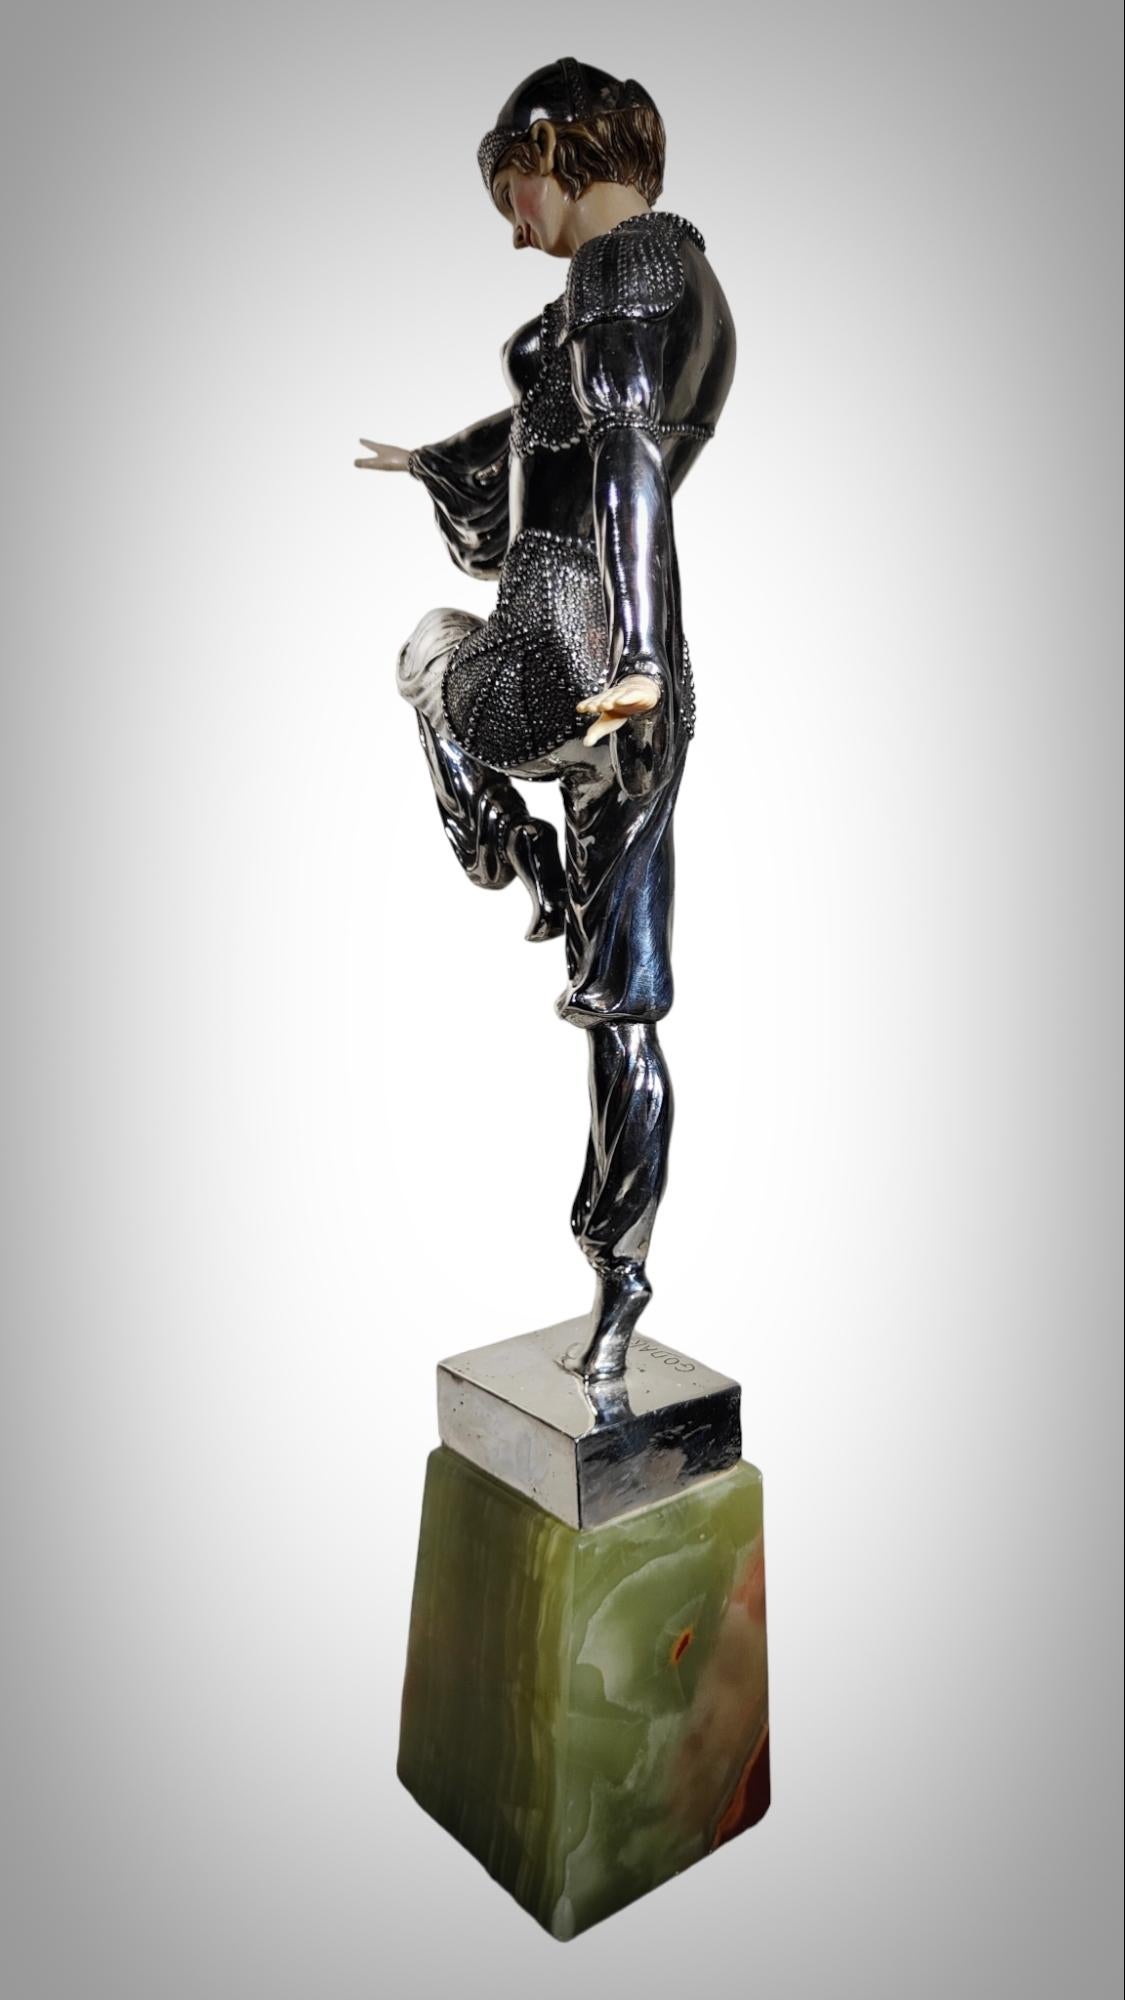 Chryselephantine Sculpture Charm Of The Orient A Godard
'THE CHARM OF THE ORIENT', A FIGURE IN silvered BRONZE CASTING AFTER THE MODEL OF A. GODARD, 1920s The dancer dressed in an exotic silver costume with turban and harem pants, standing on one